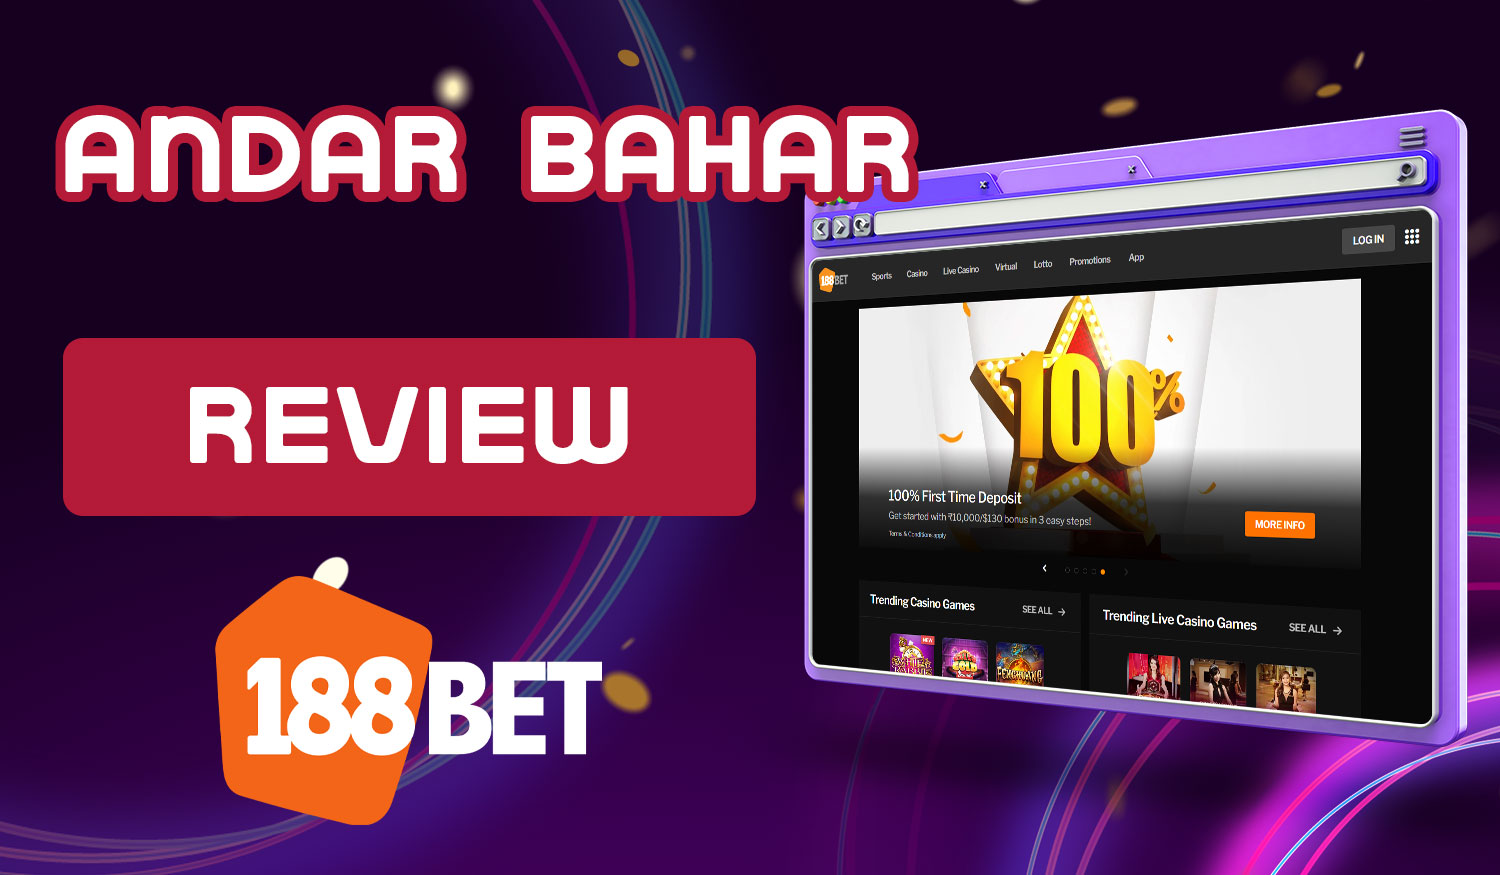 Detailed review of the 188Bet India bookmaker on Andar Bahars